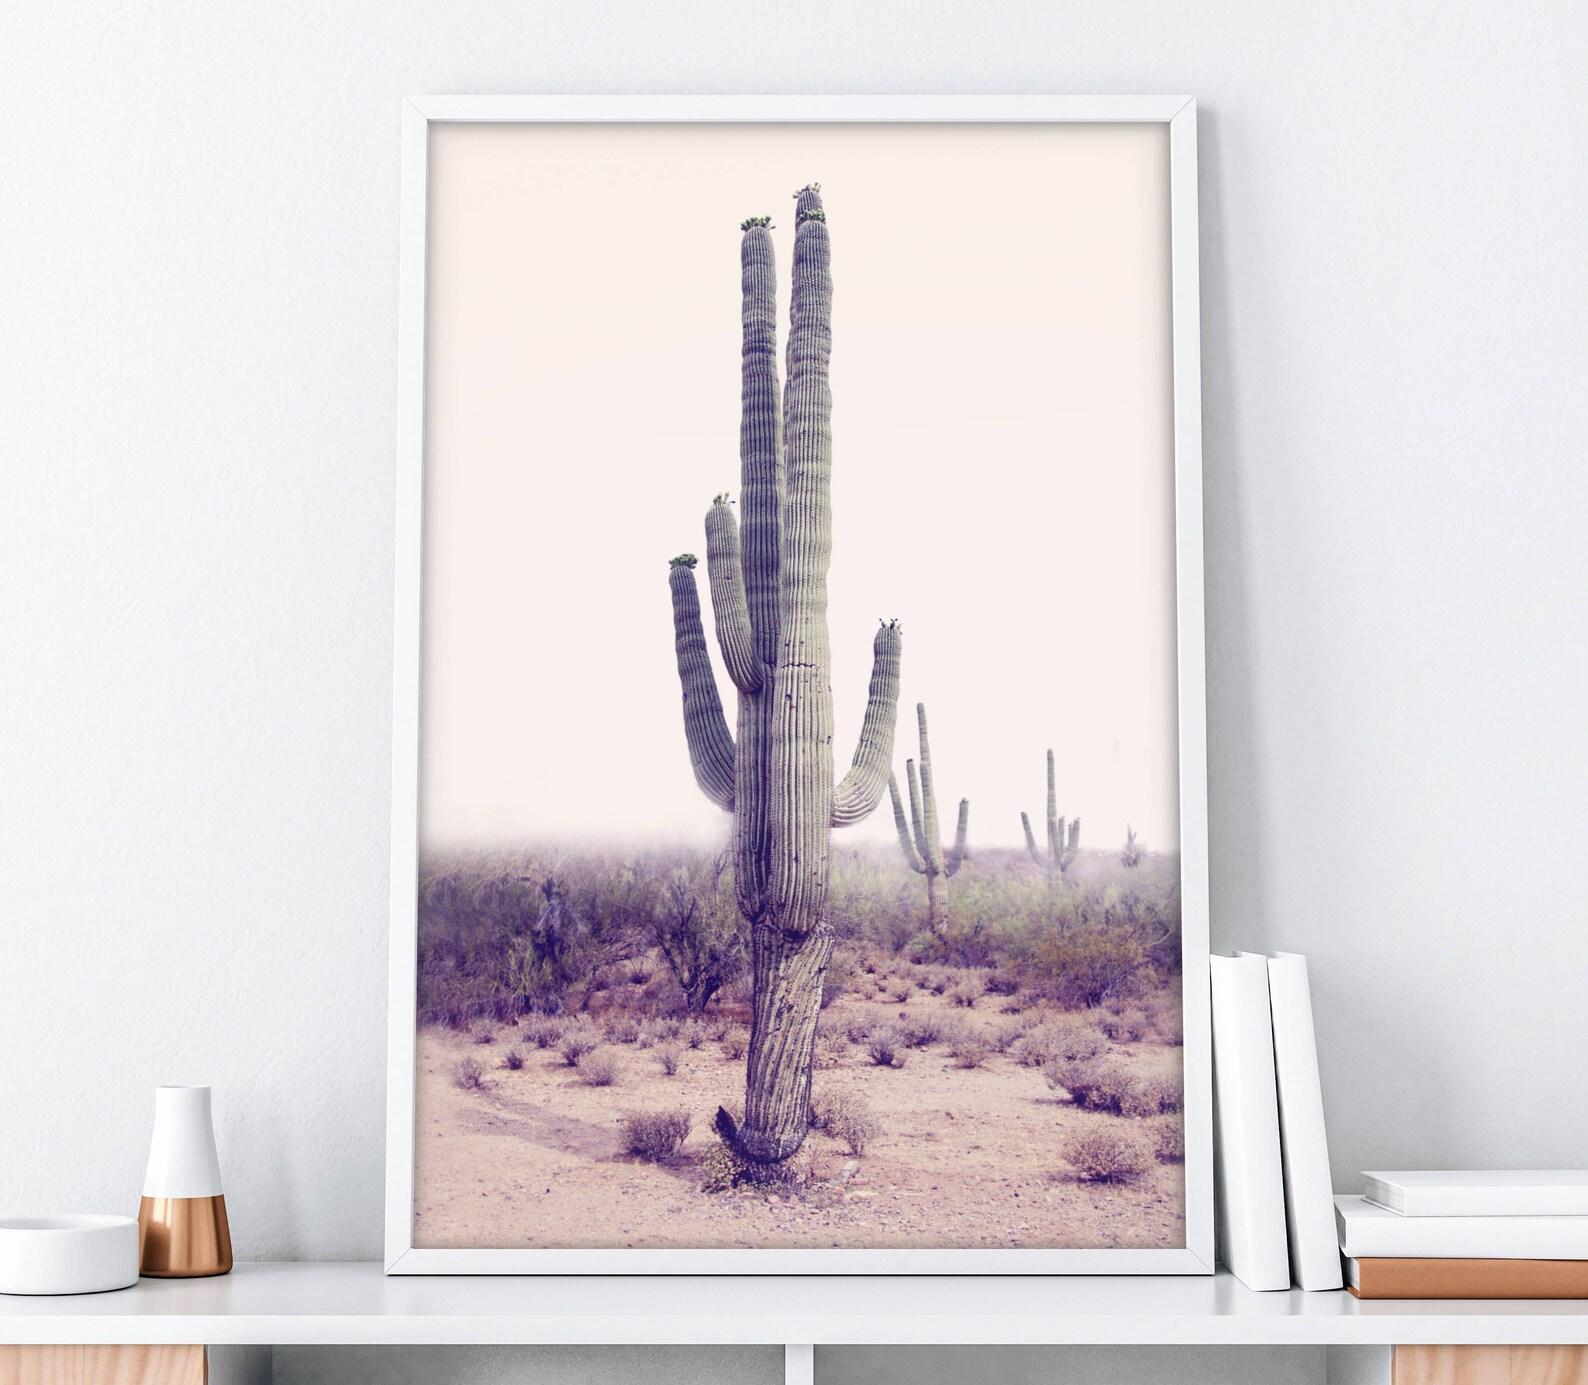 Limited Edition Soft desert landscape triptych (Set of 3 cactus canvas prints) Printed on high quality canvas & enhanced with touches of paint texture. Shipped rolled in mailing tube. Editions of 50, each print is numbered.
We can offer framing